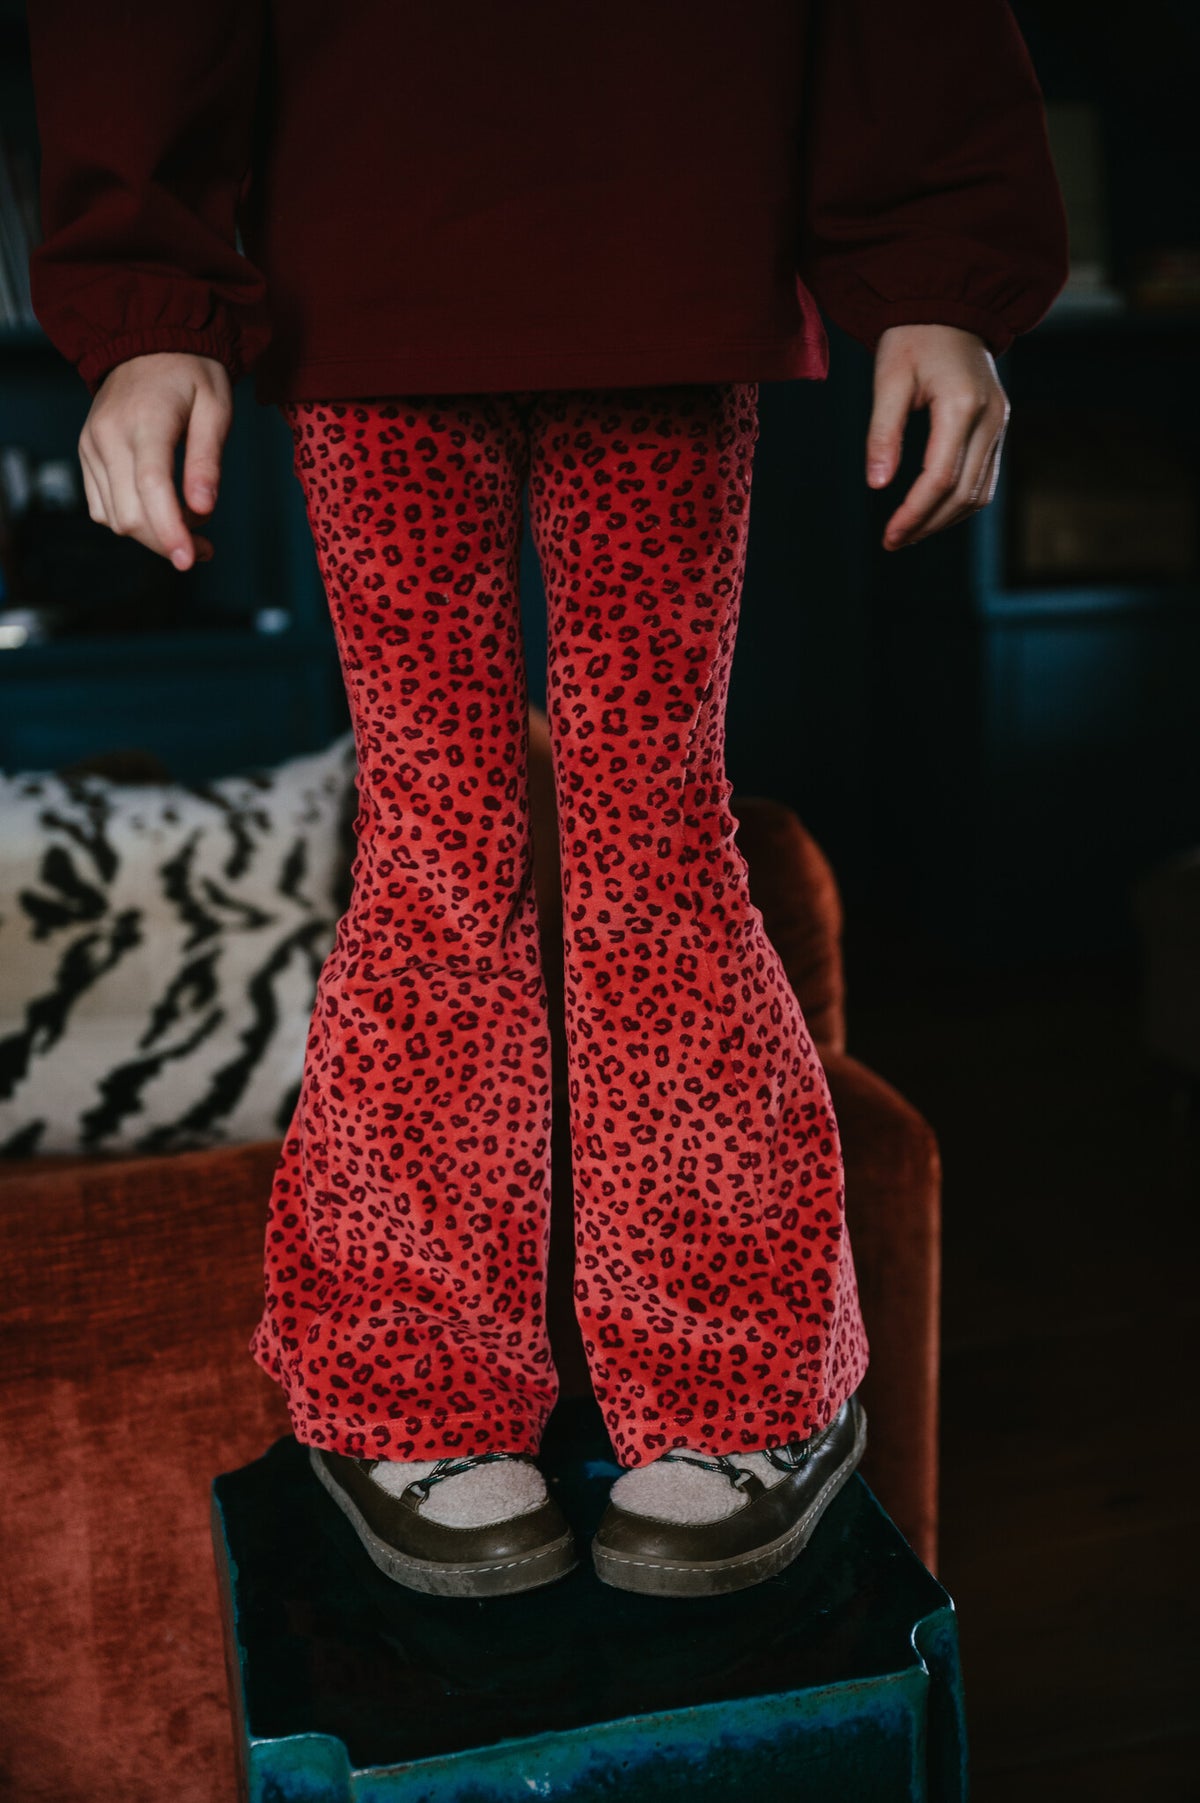 Bowie Flared Pants Velour | Red Leopard AOP